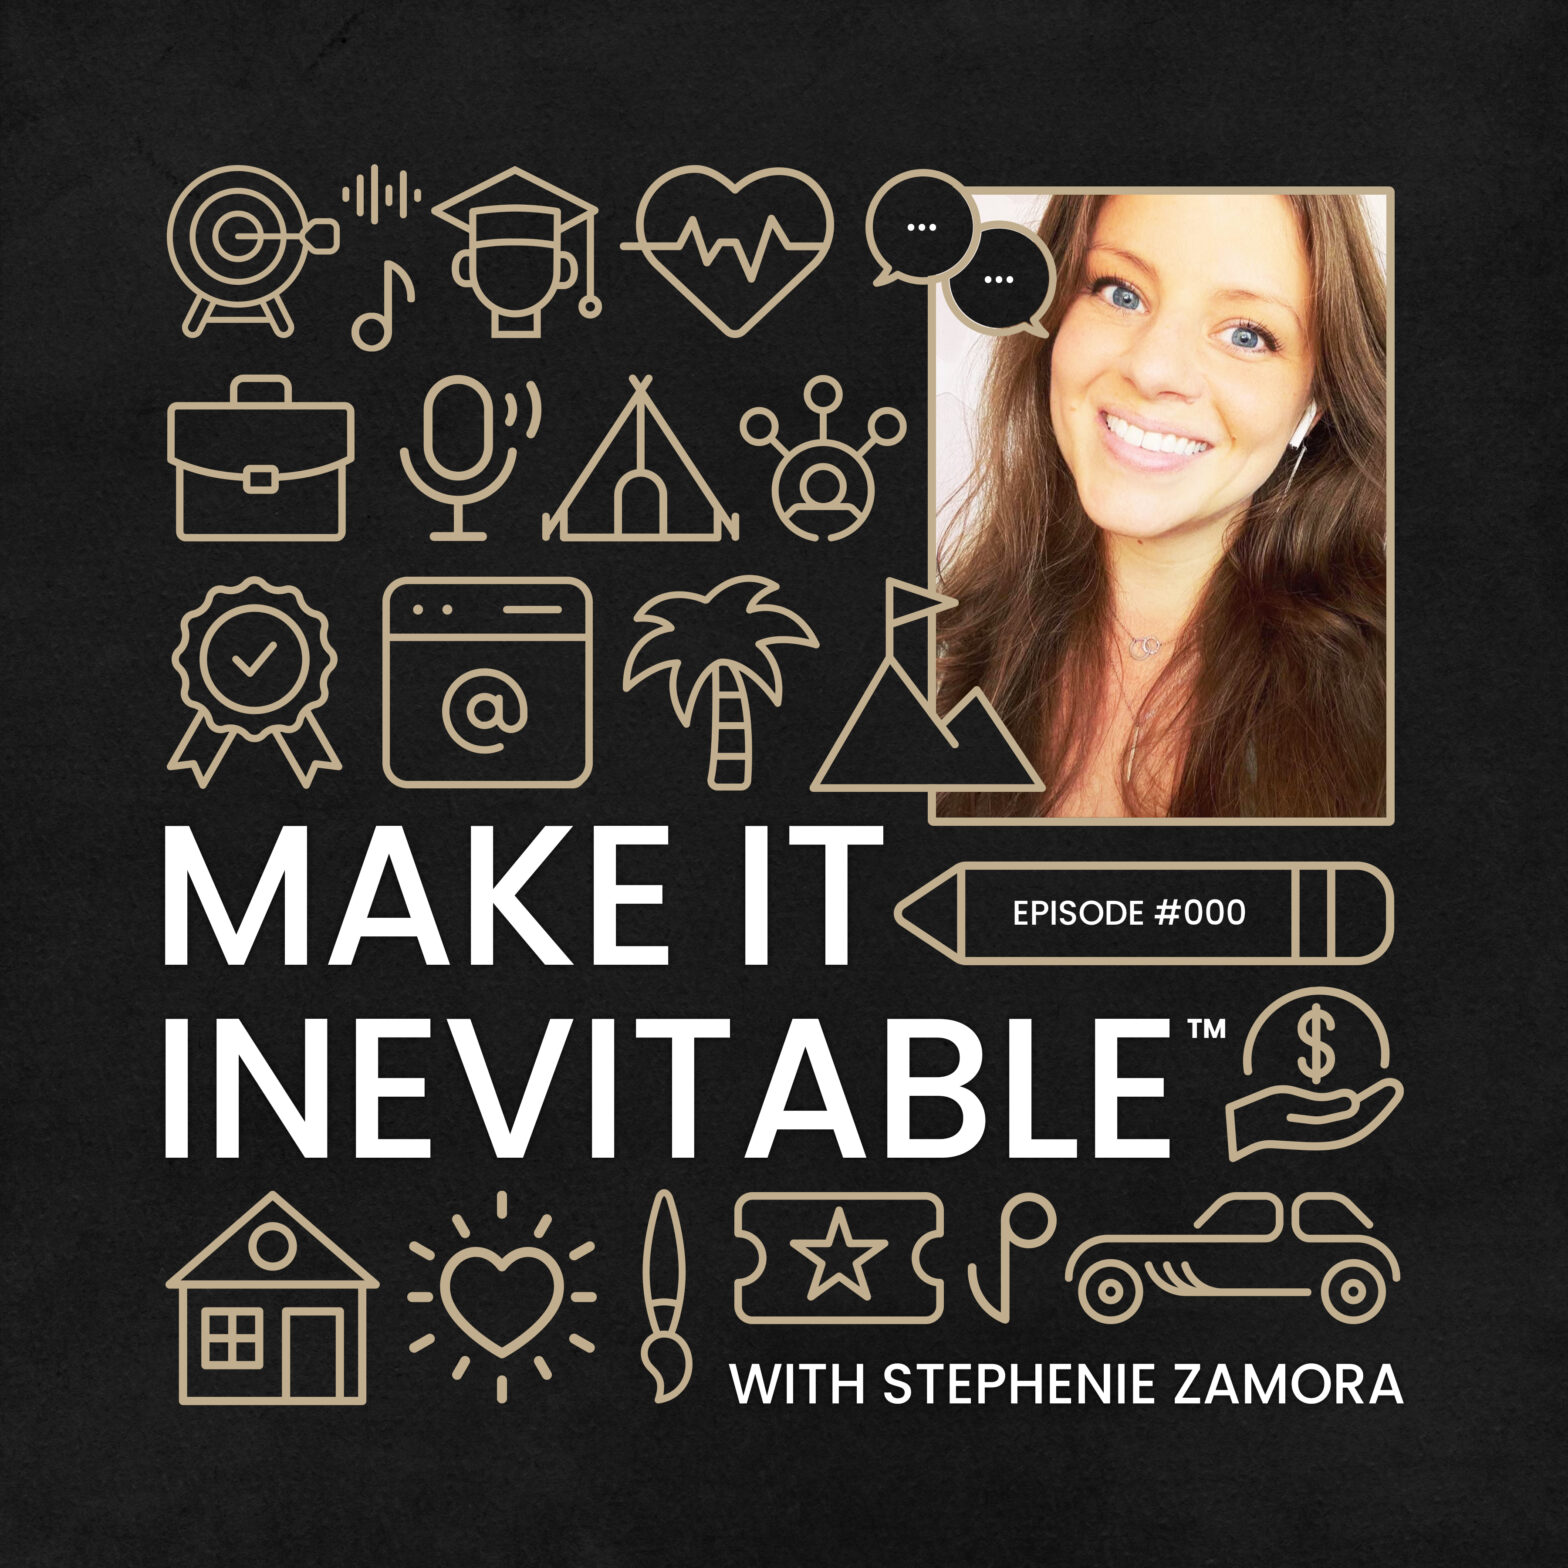 Cover of the Make it Inevitable Podcast with Stephenie Zamora